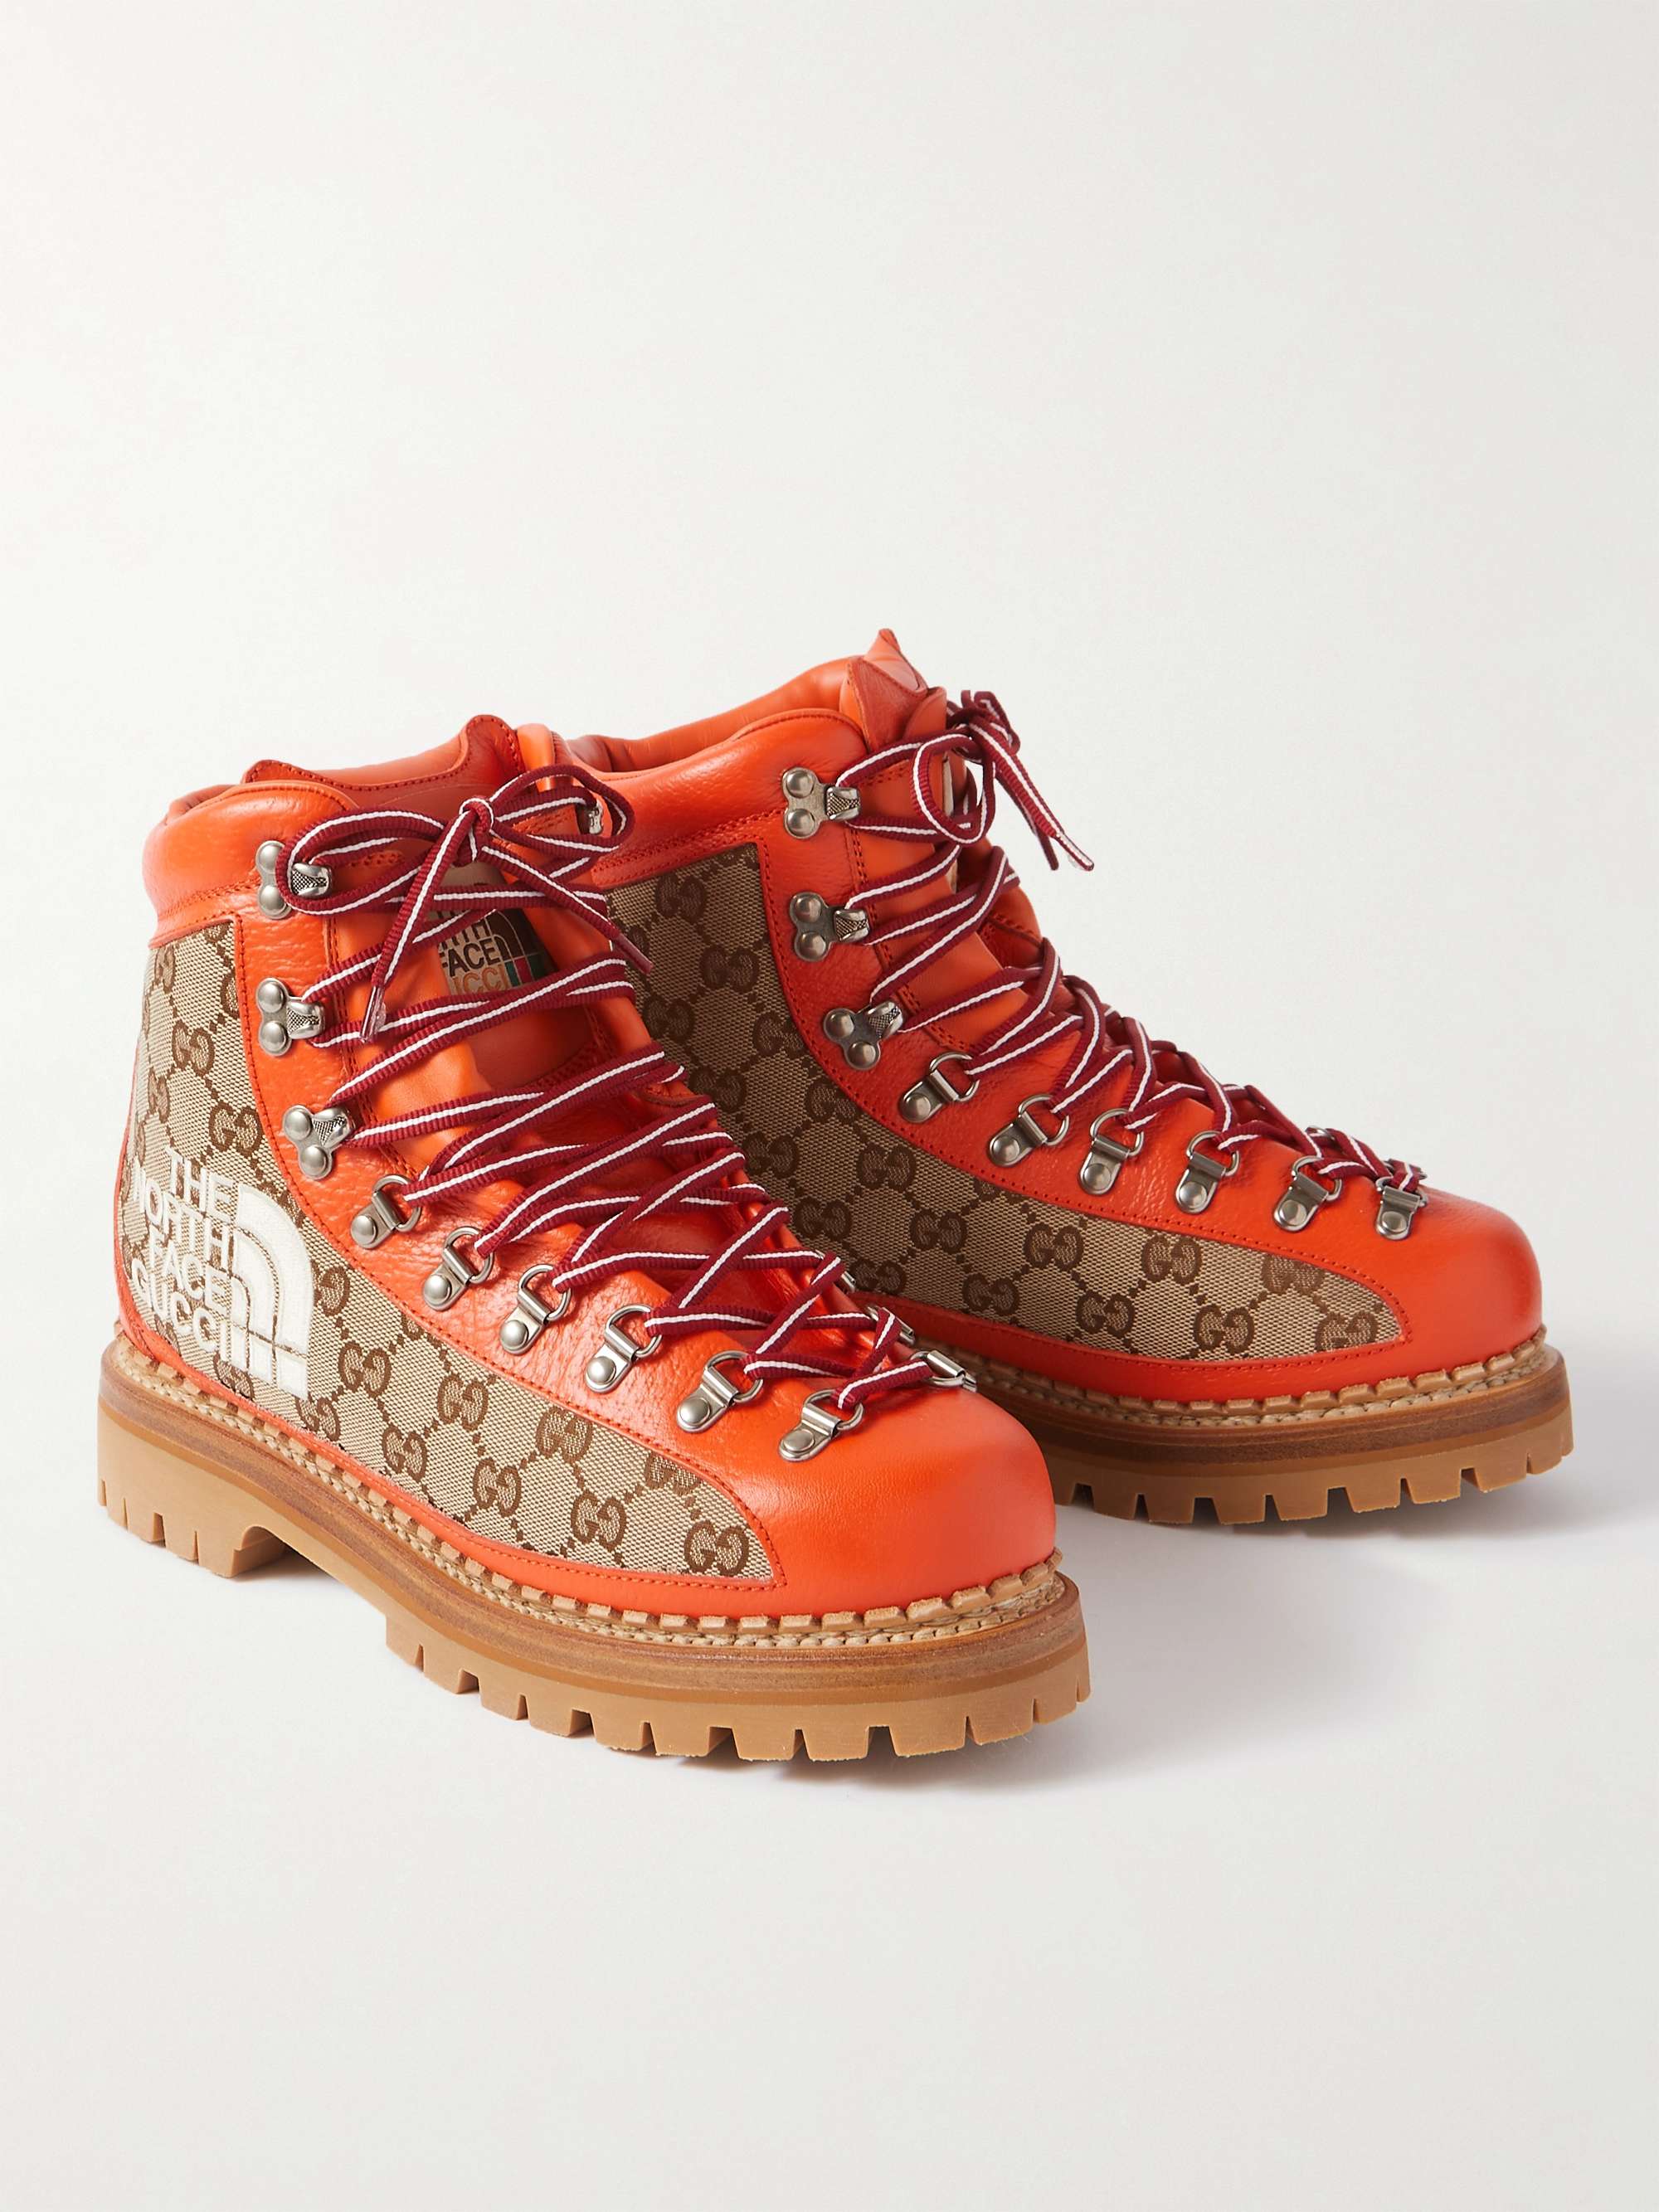 GUCCI + The North Face Logo-Embroidered Monogrammed Canvas and Leather Hiking Boots